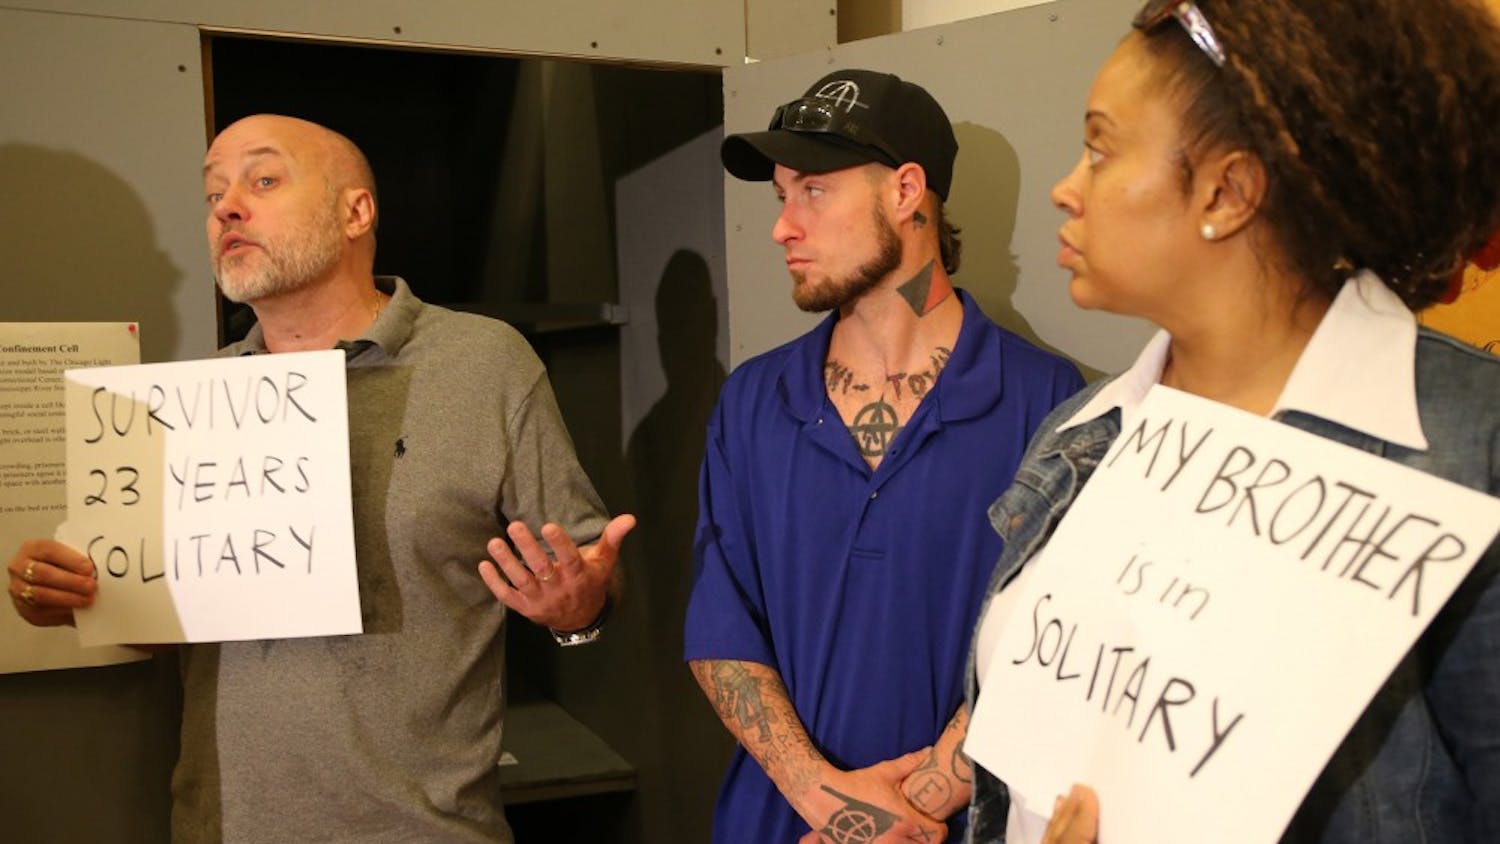 Brian Nelson, left, who spent 23 years in solitary confinement, speaks about his time in solitary confinement on June 24, 2015, during a press conference regarding the class action lawsuit filed on behalf of prisoners against the Illinois Department of Corrections for its overuse and misuse of solitary confinement in Illinois prisons in Chicago. Center is Mark Neiweem, who spent 5 months in solitary confinement, and Latonia Walker who has a brother in solitary confinement. (Antonio Perez/Chicago Tribune/TNS)